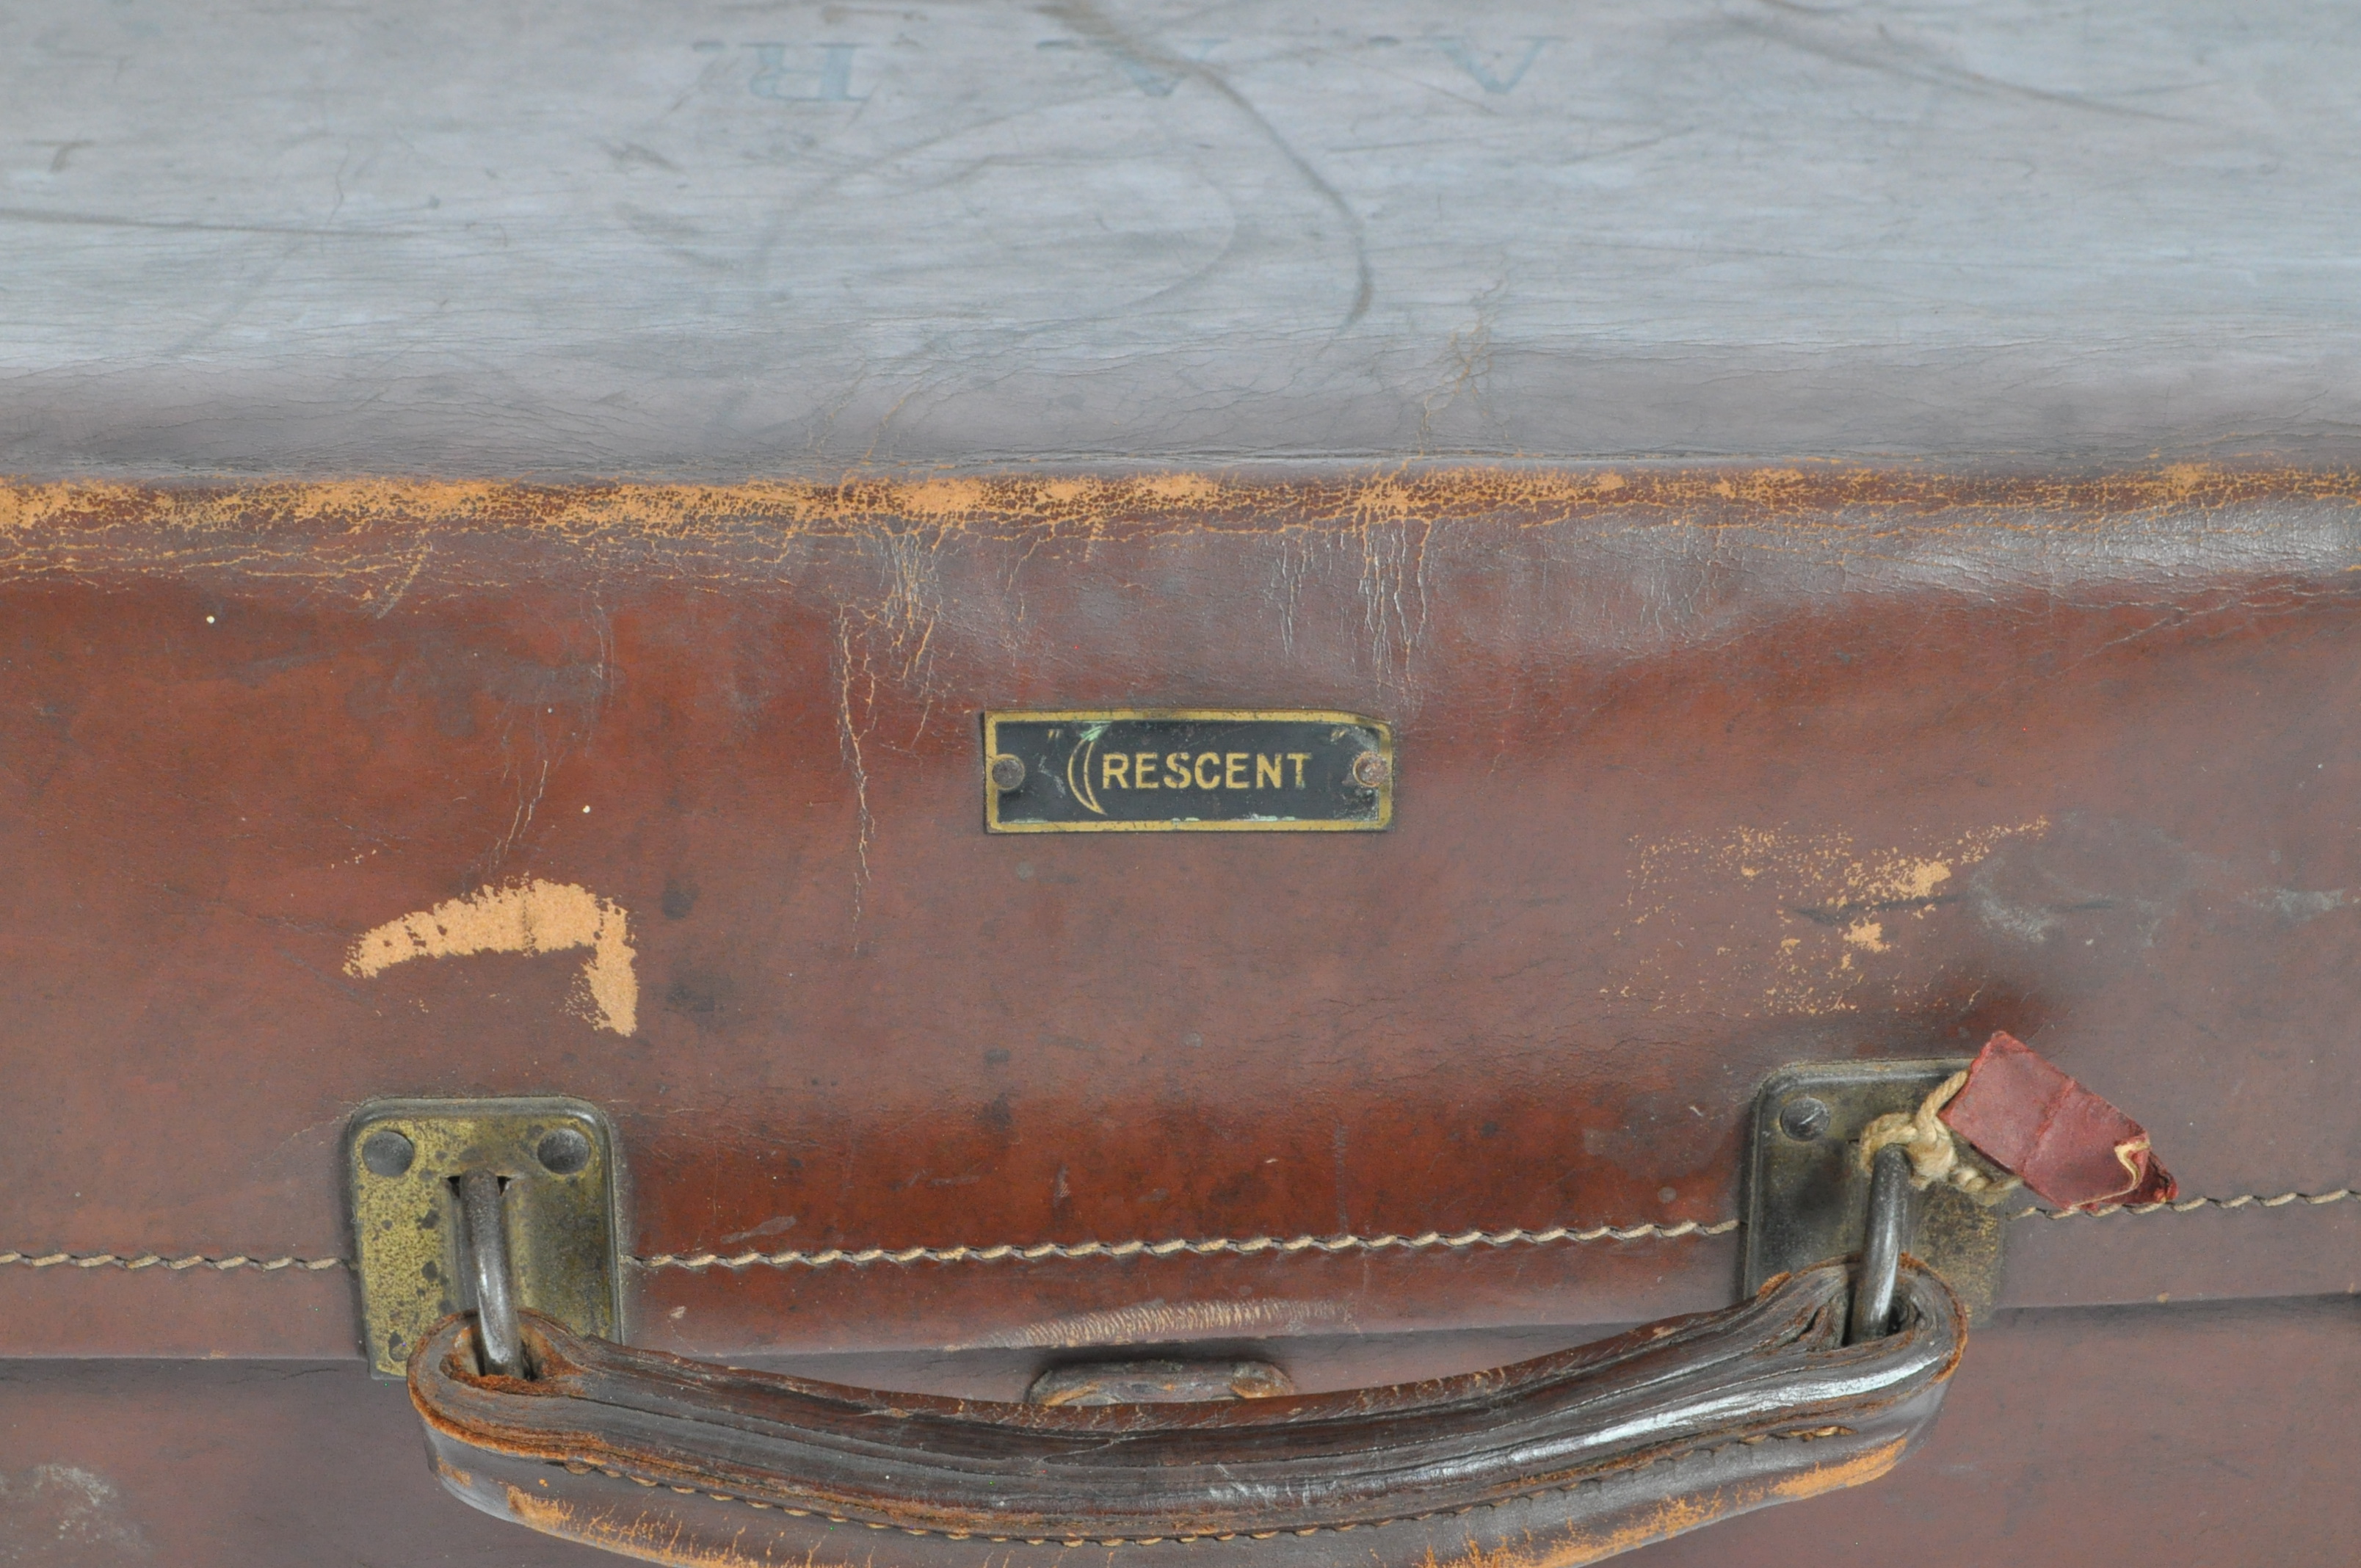 COLLECTION OF VINTAGE LUGGAGE - LEATHER SUITCASES - Image 11 of 14